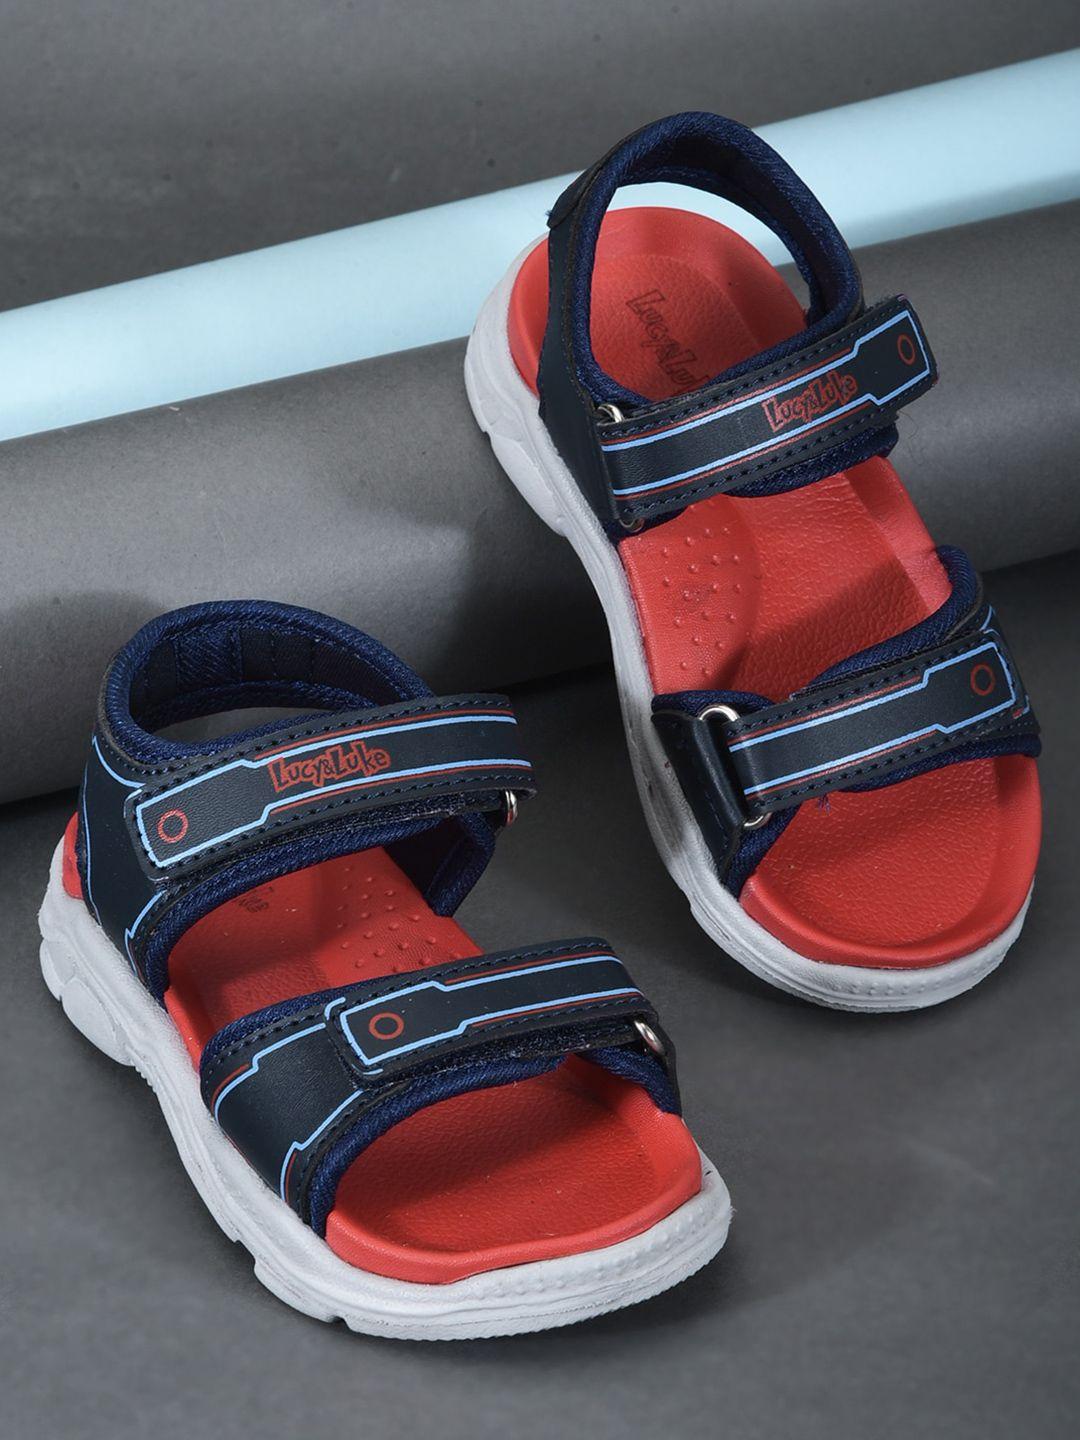 liberty kids fabric open toe sports sandals with velcro